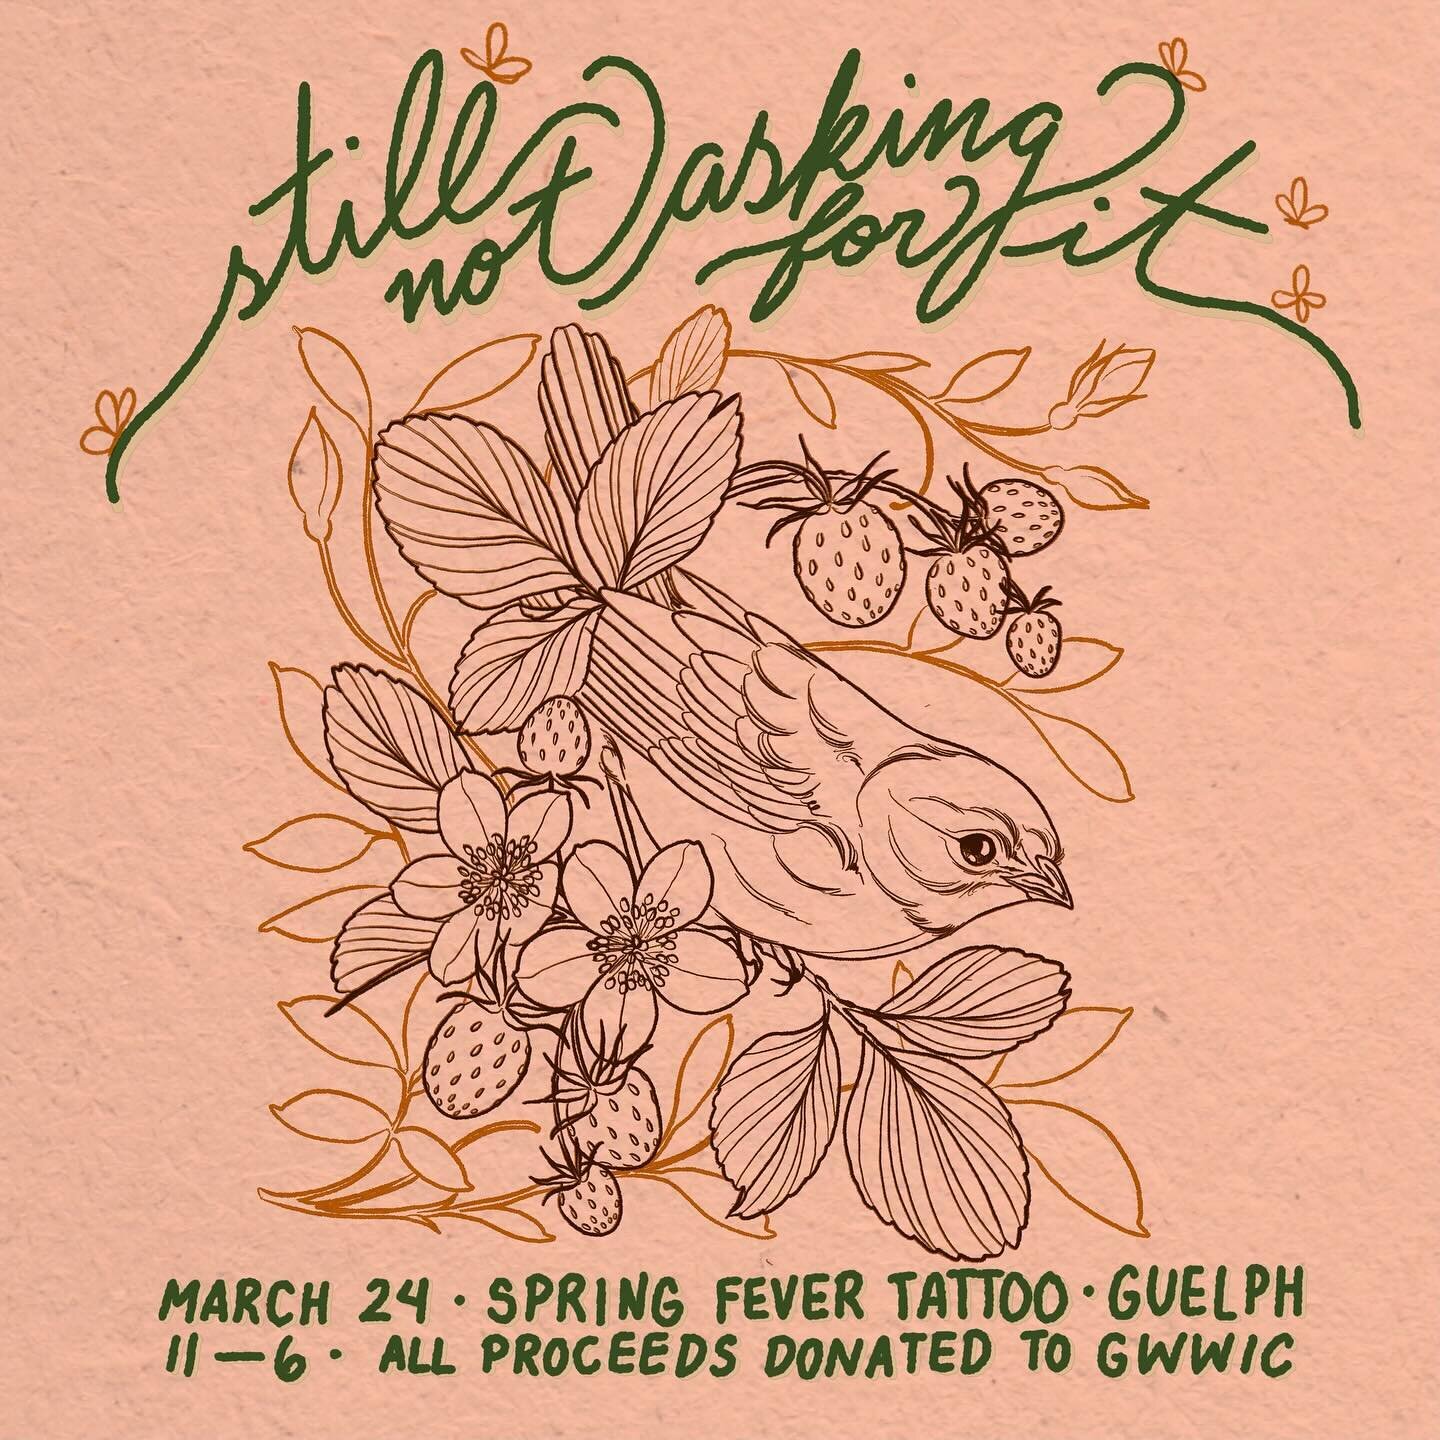 It&rsquo;s time!!! 

Here&rsquo;s my flash for the @stillnotaskingforit_flashevent on 
Sunday March 24th! This will be a first come, first served flash event, no need to email or book in. Just show up! Tattooing starts at 11am 🖤

All pieces are numb